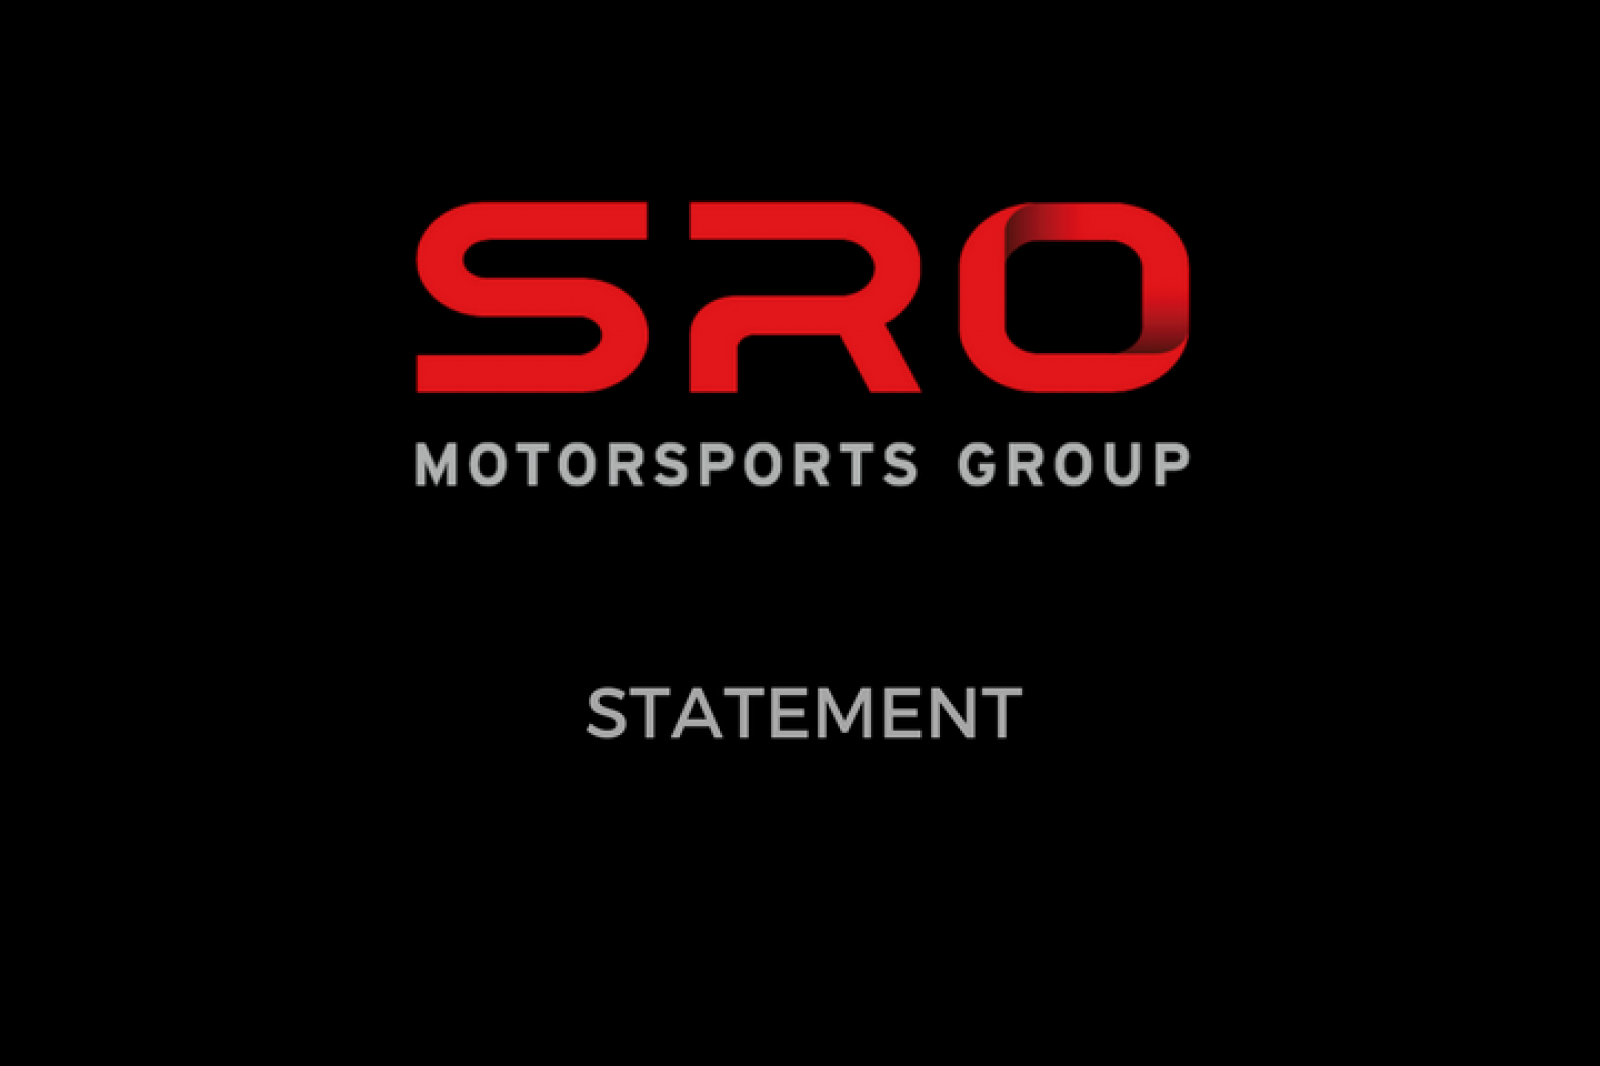 Statement from SRO Motorsports Group